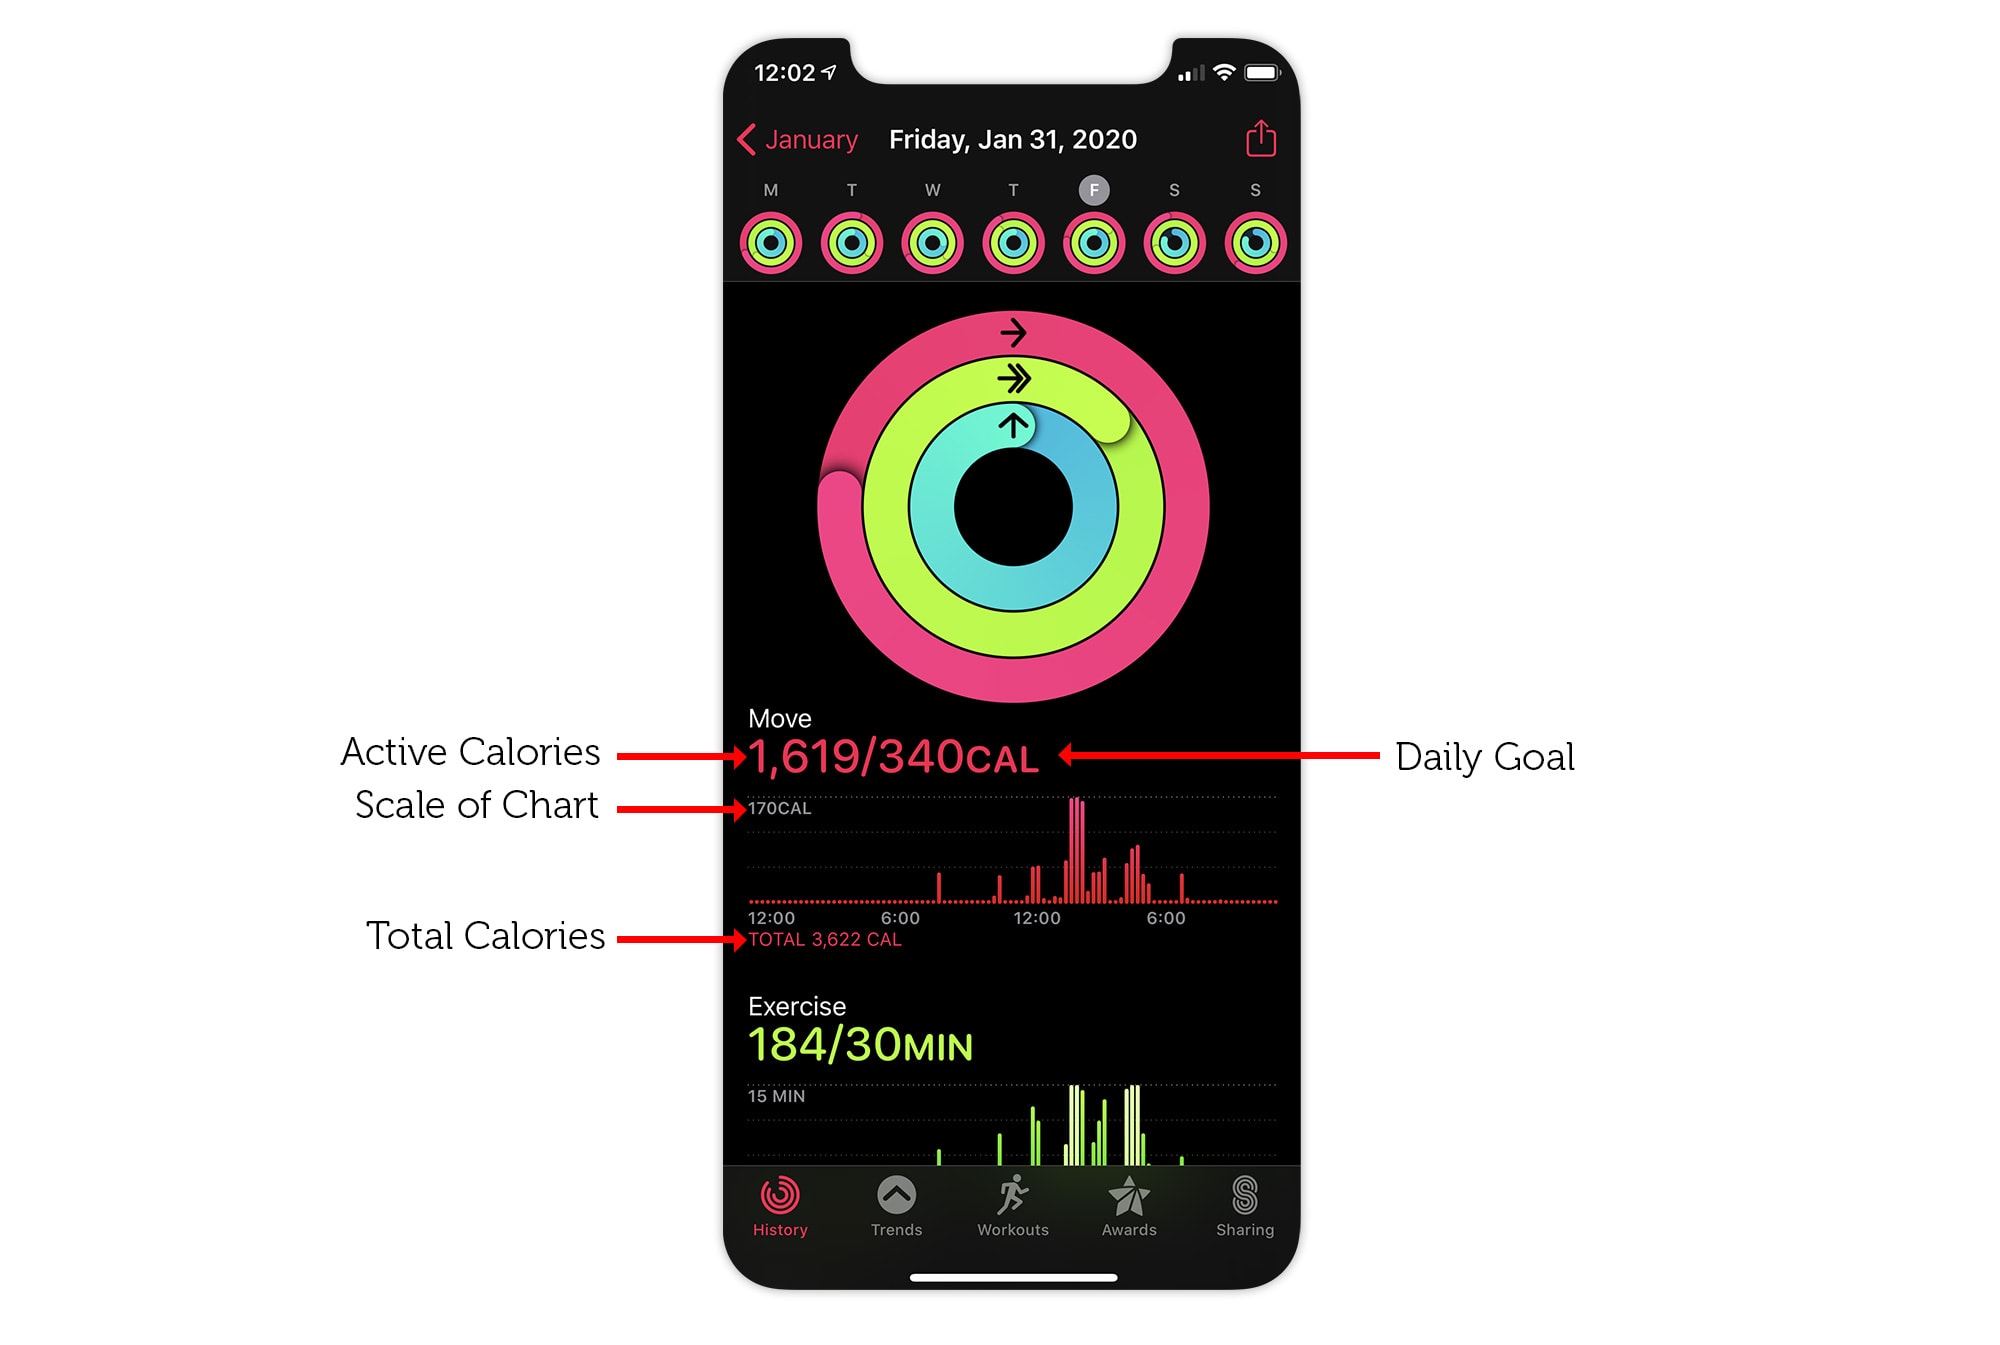 Where to find Active Calories and Total Calories in the Activity app.